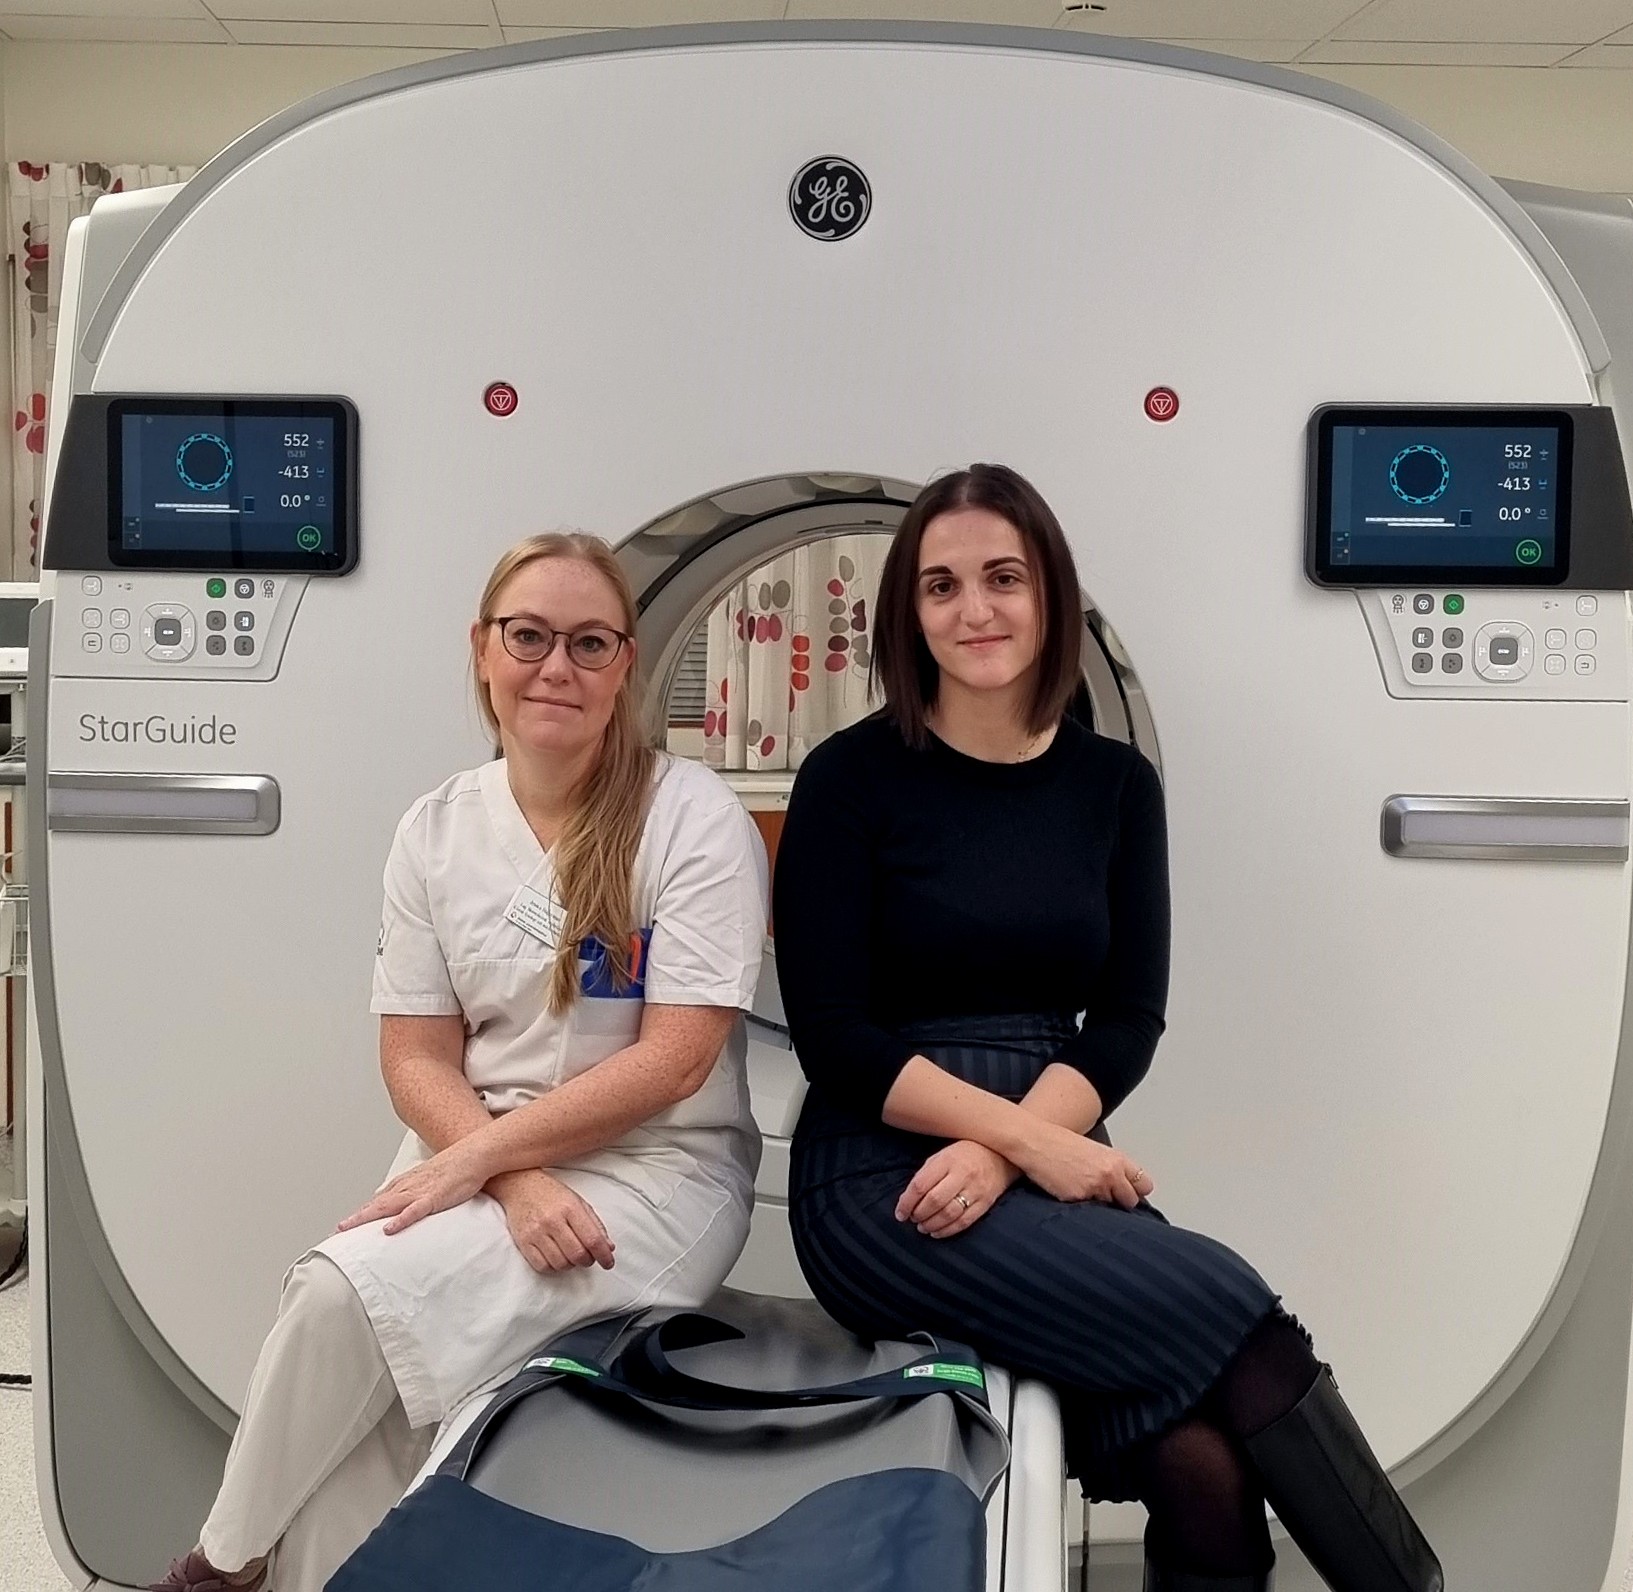 Technologist Jessica Hagerman and Medical Physicist Irma Ceric Andelius from the department of Imaging and Physiology at Skåne University Hospital with their new digital 3D SPECT/CT, StarGuide – the first hospital in Sweden to acquire the SPECT/CT scanner.